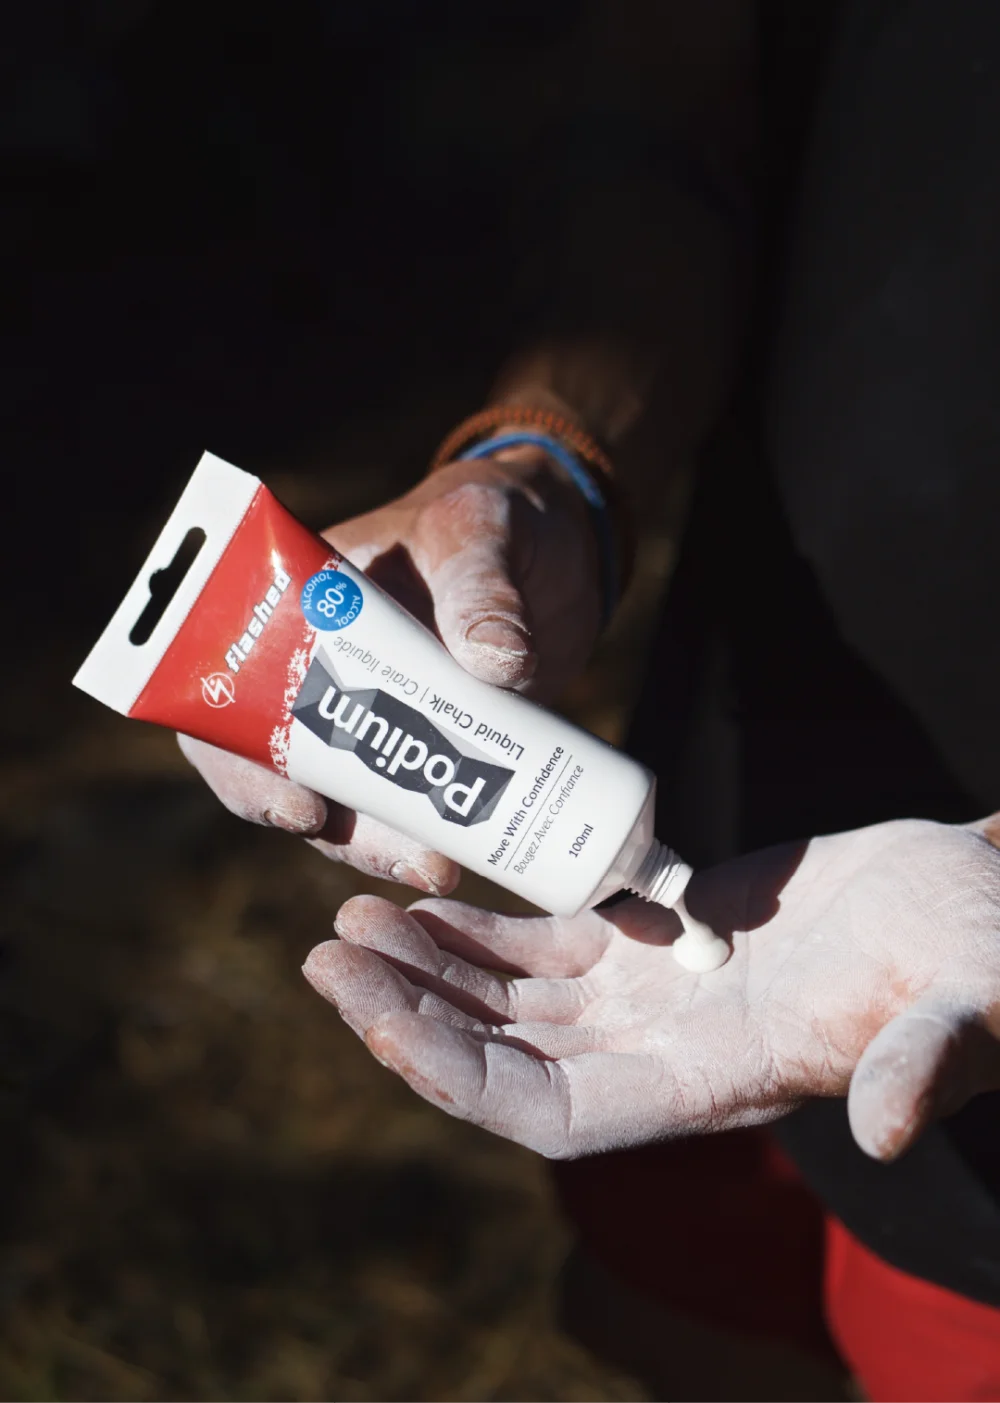 Liquid chalk being applied to hands for climbing